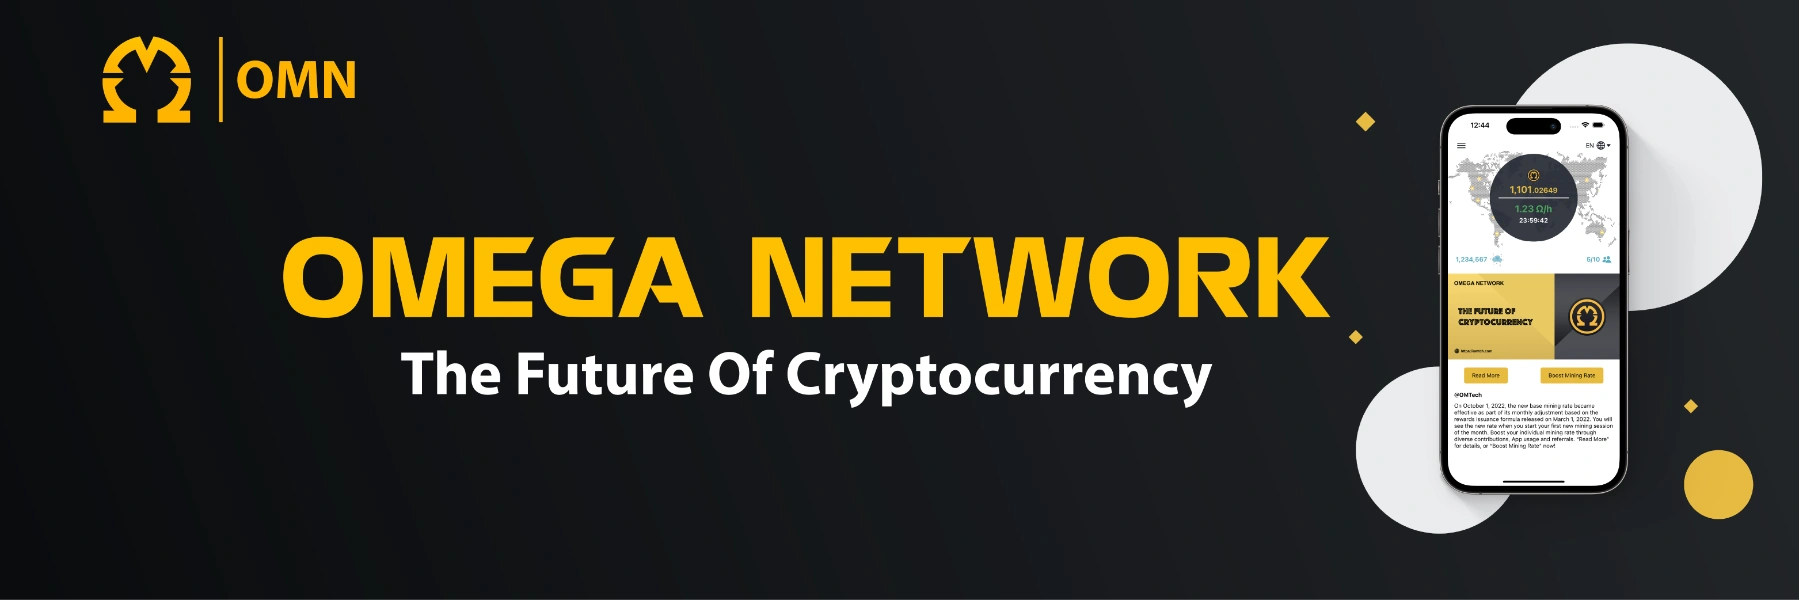 join azcoiner airdrops on omega network and receive rewards up to 200000 omn 65b94f4341935